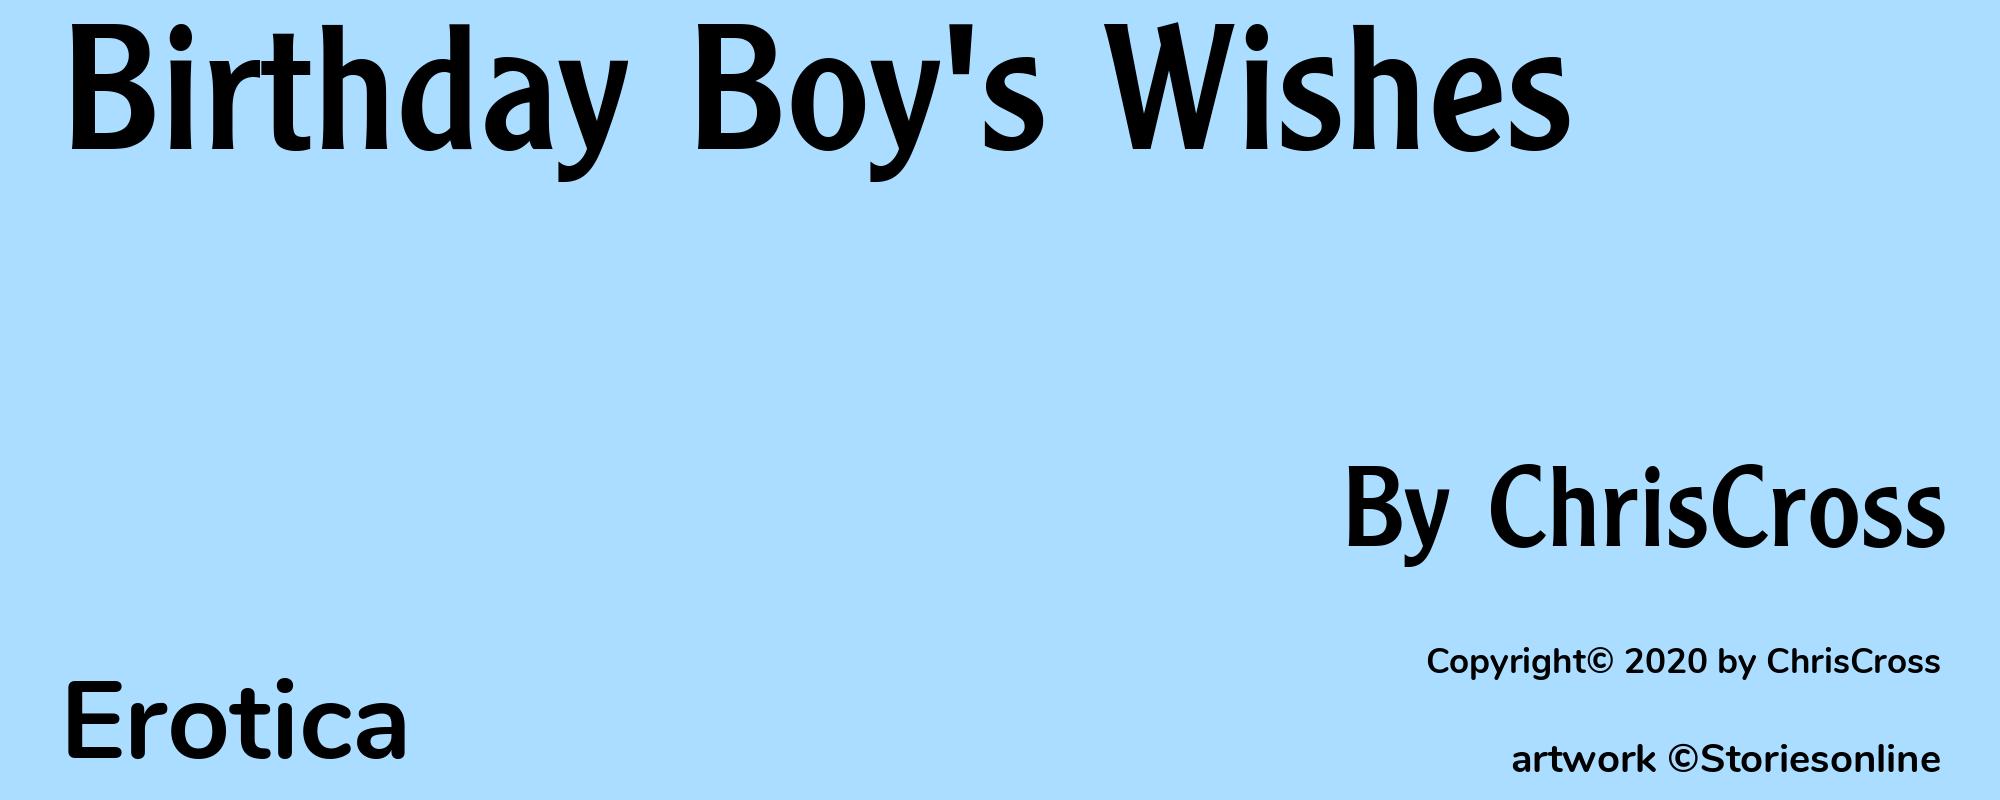 Birthday Boy's Wishes - Cover